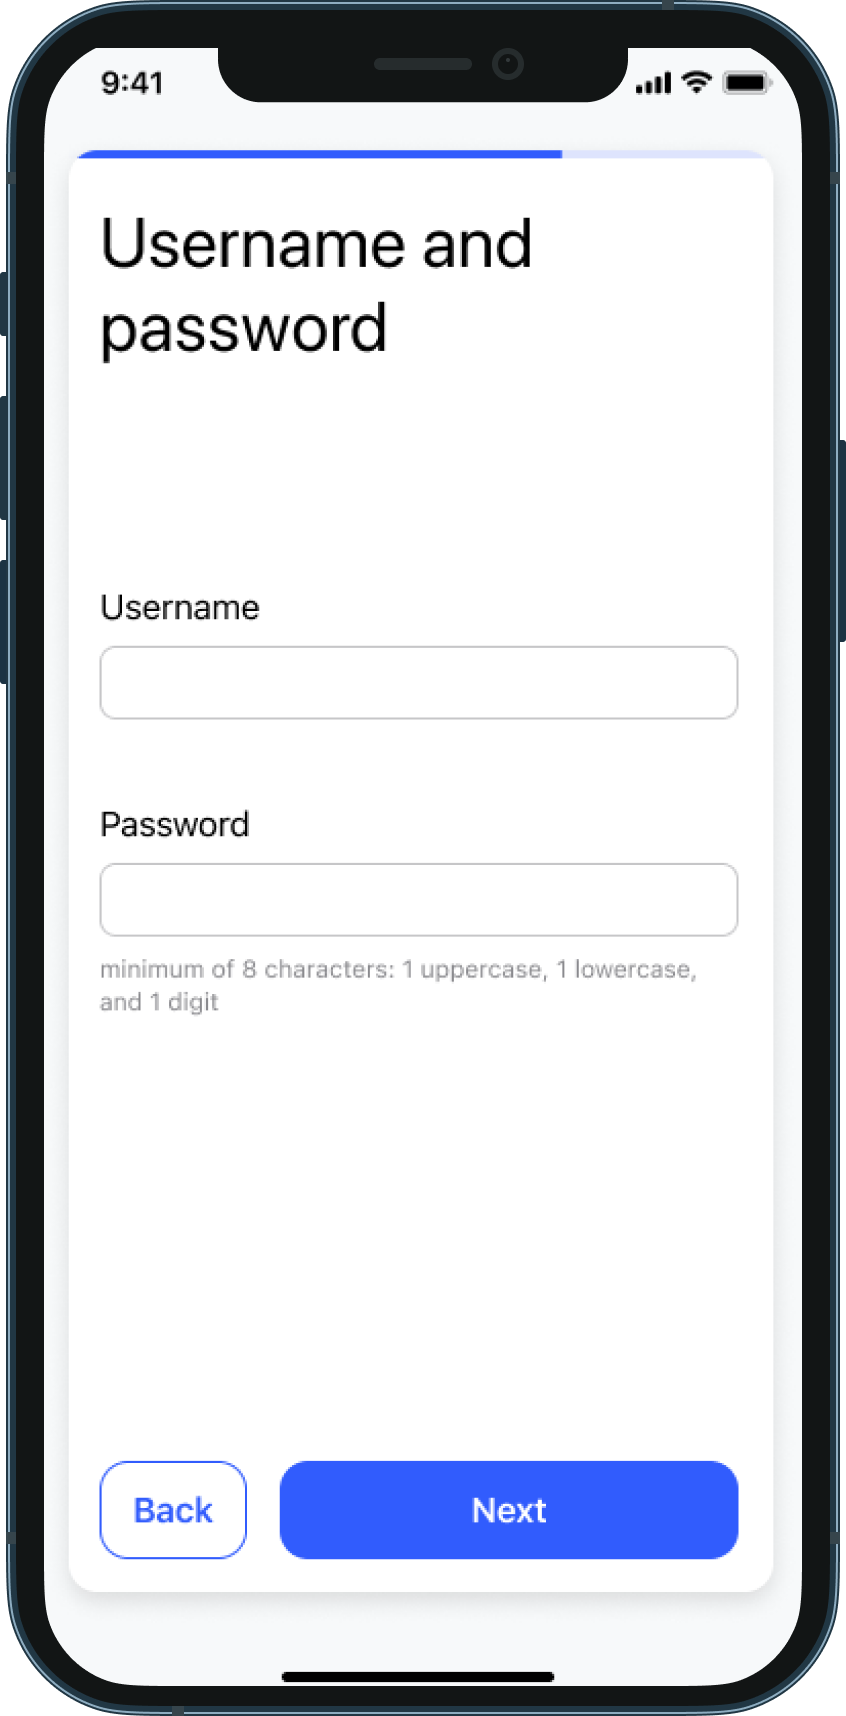 A screen that includes a field to create a username and a field to create a password. A Next button allows the user to proceed to the next screen and a Back button allows the user to return to the previous screen.